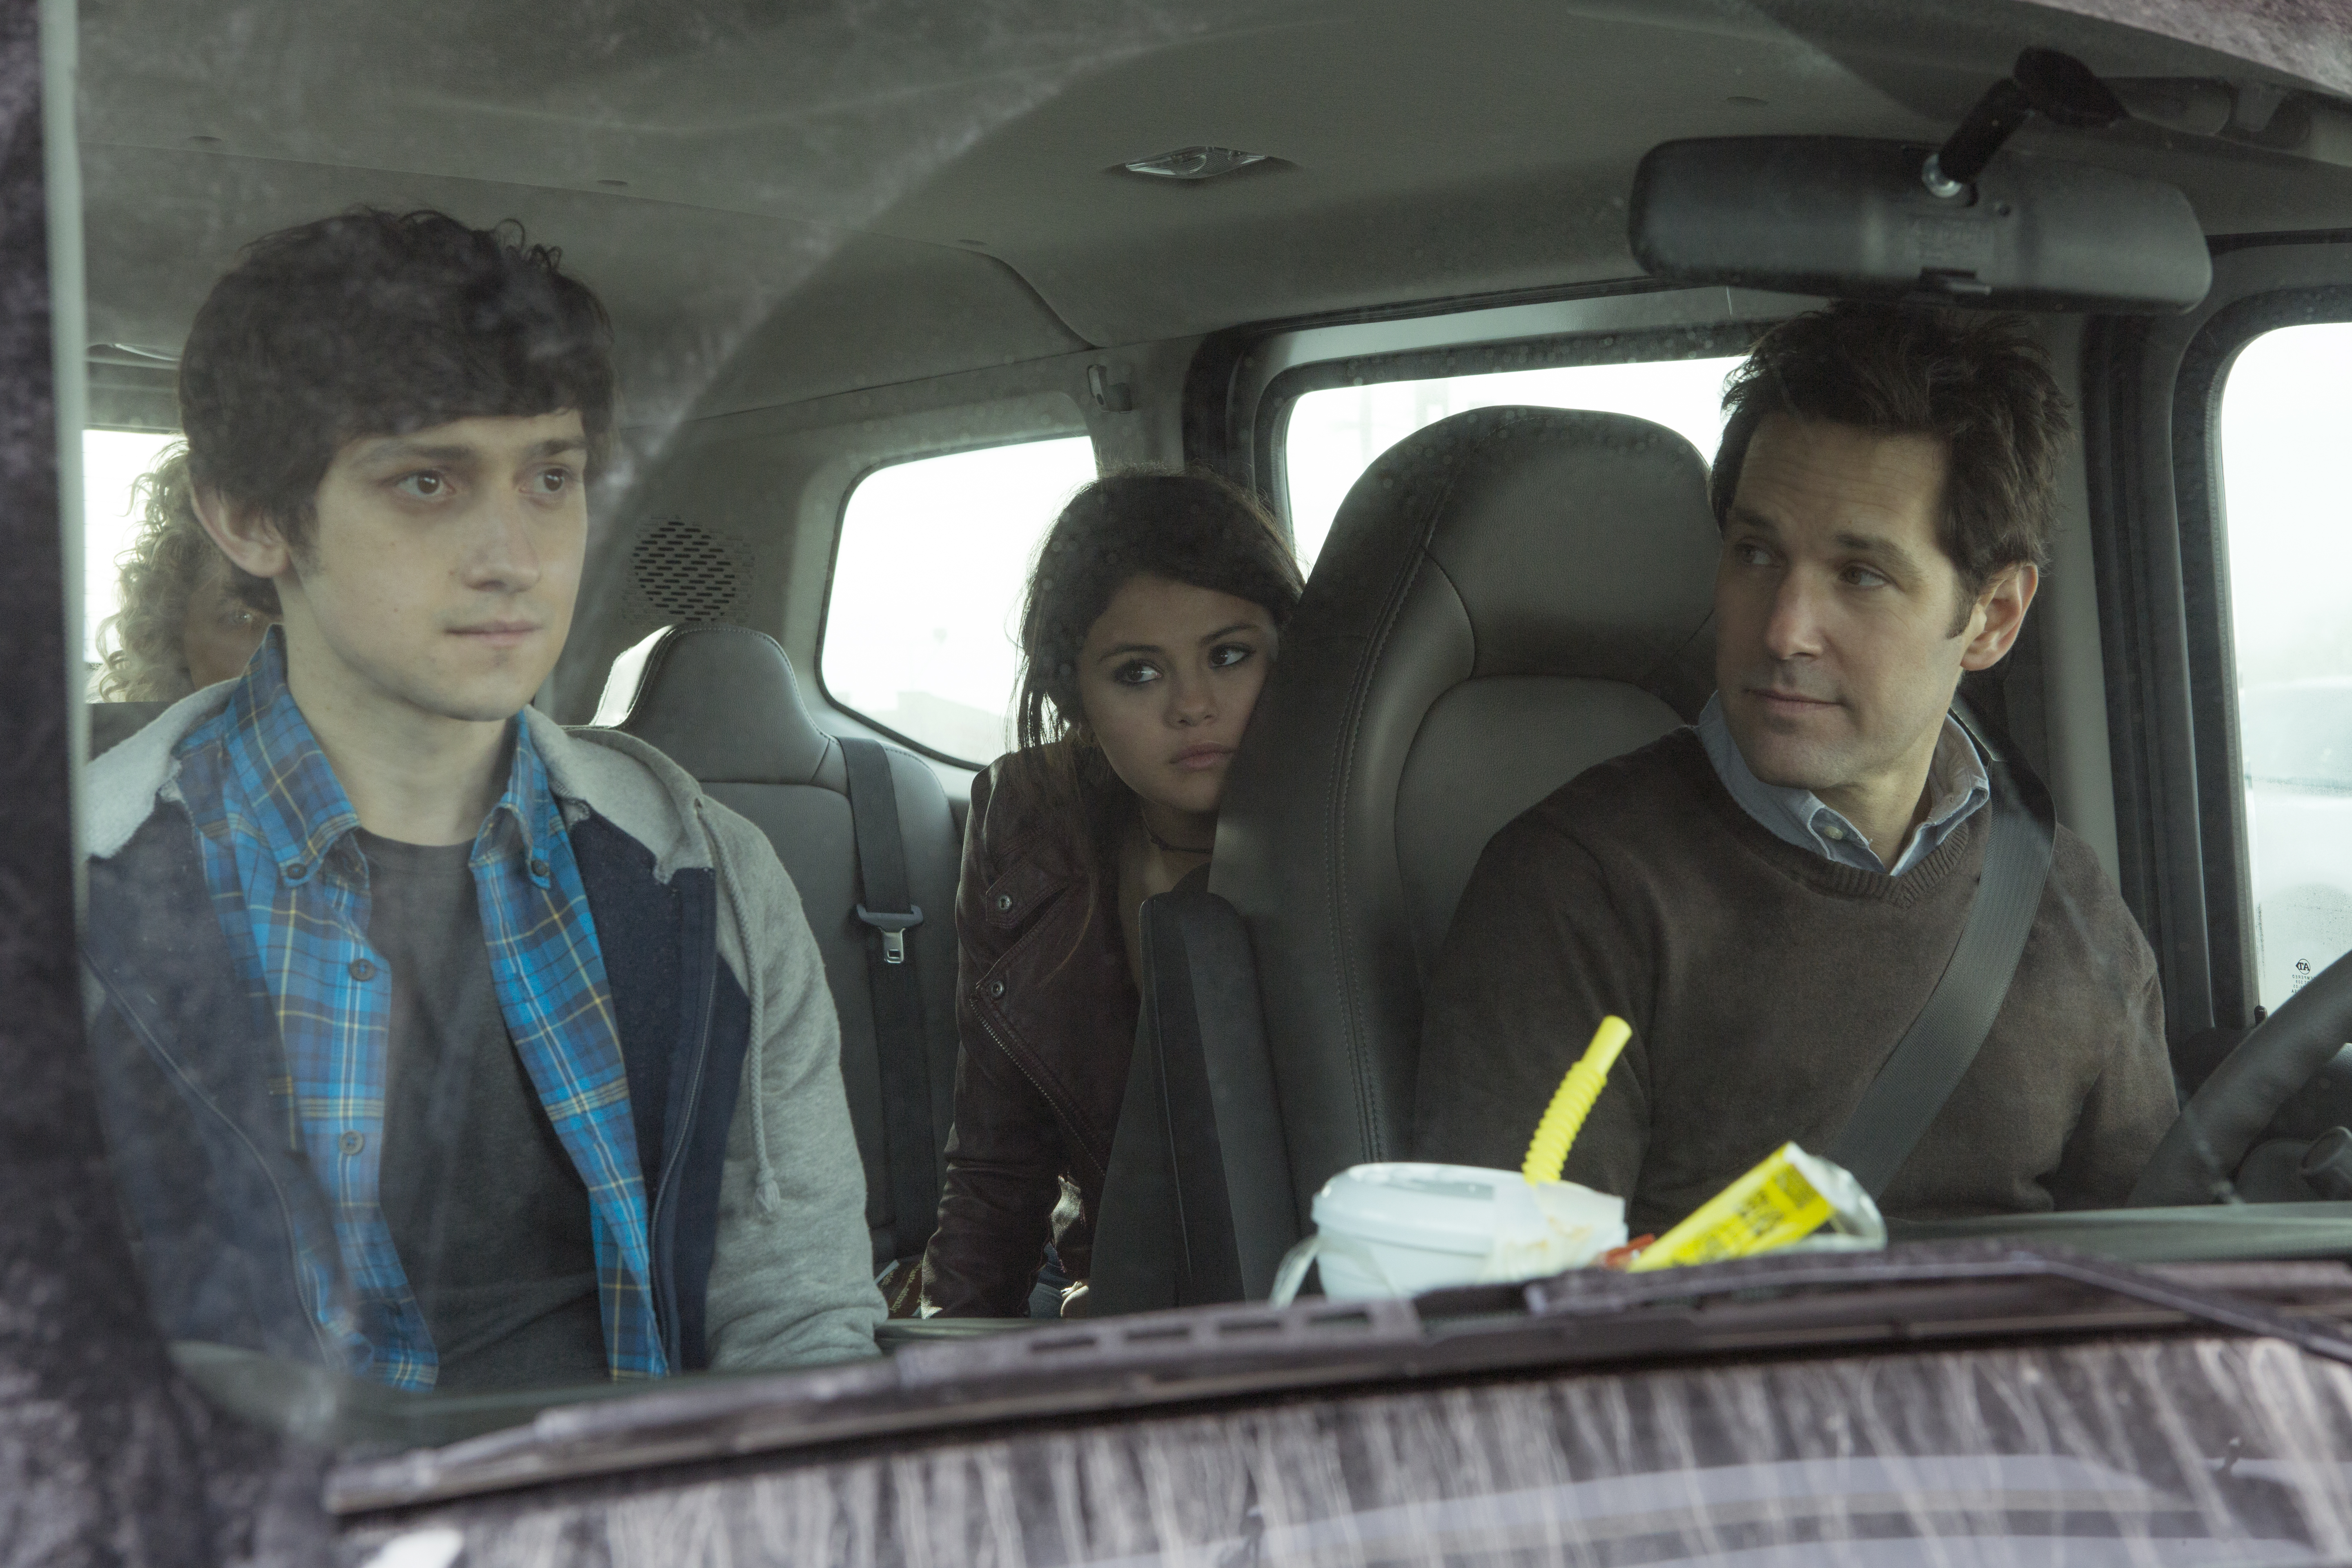 Check out the trailer and photo gallery for THE FUNDAMENTALS OF CARING.